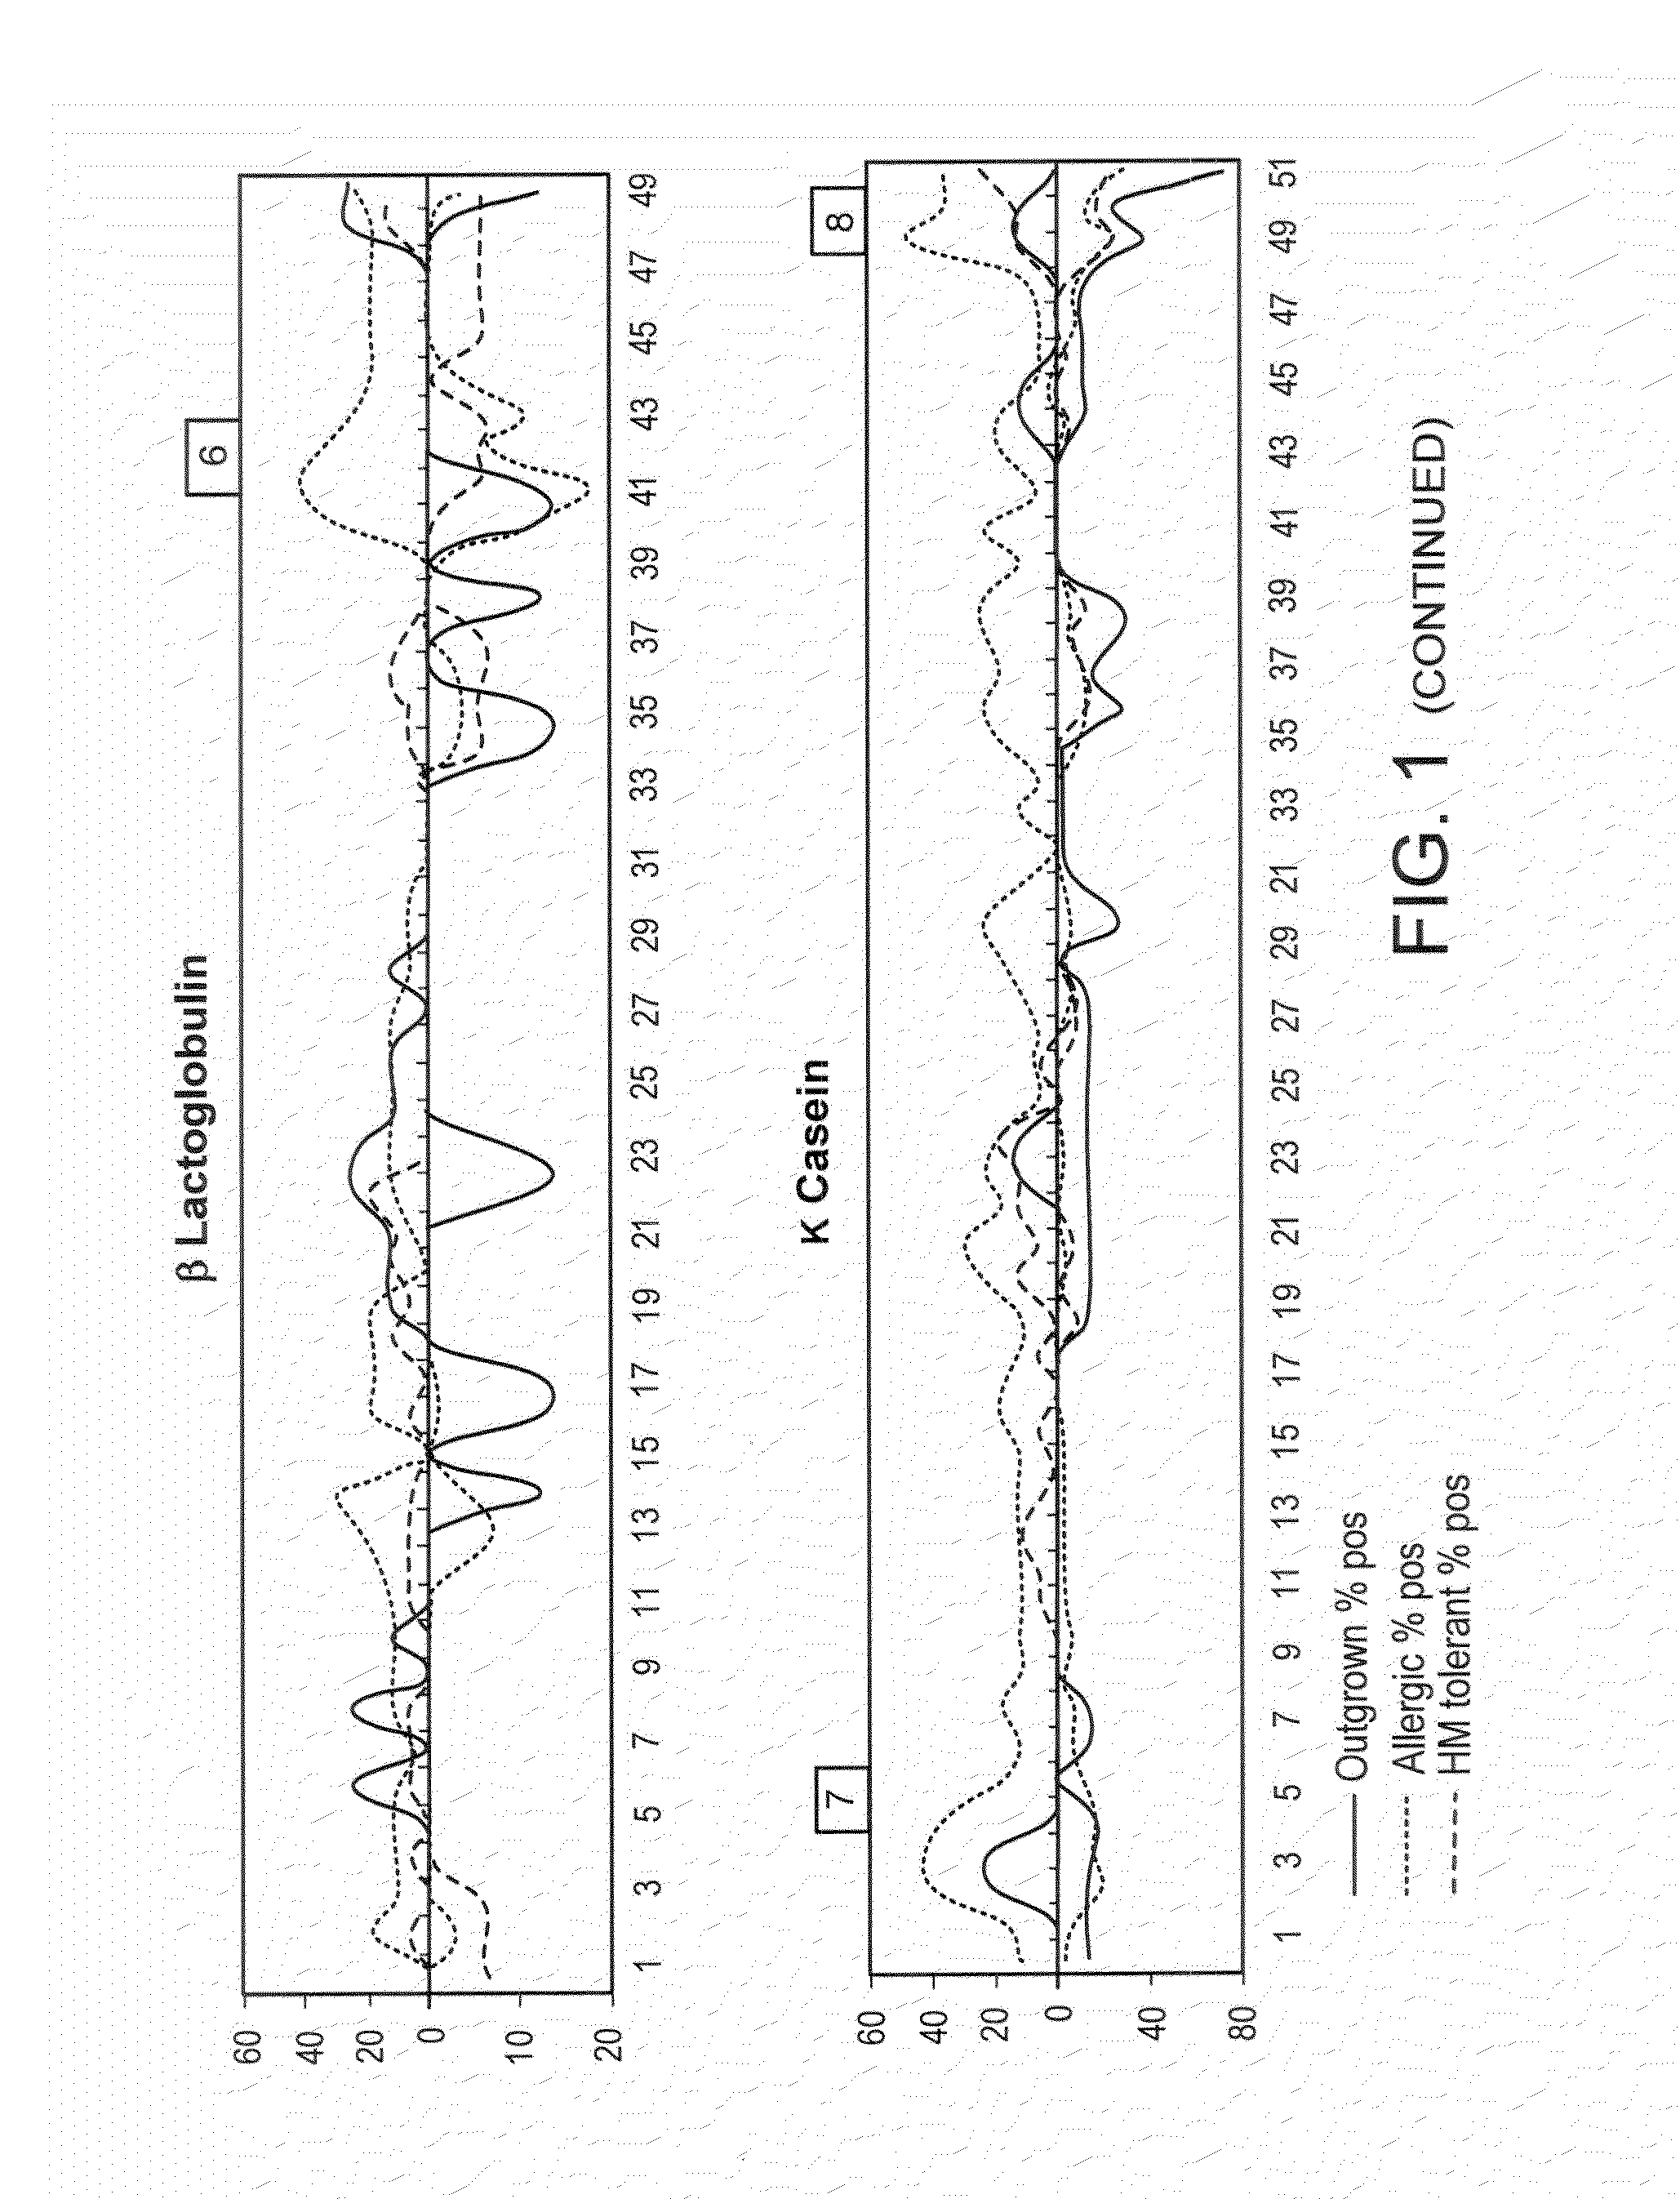 Methods for characterizing antibody binding affinity and epitope diversity in food allergy